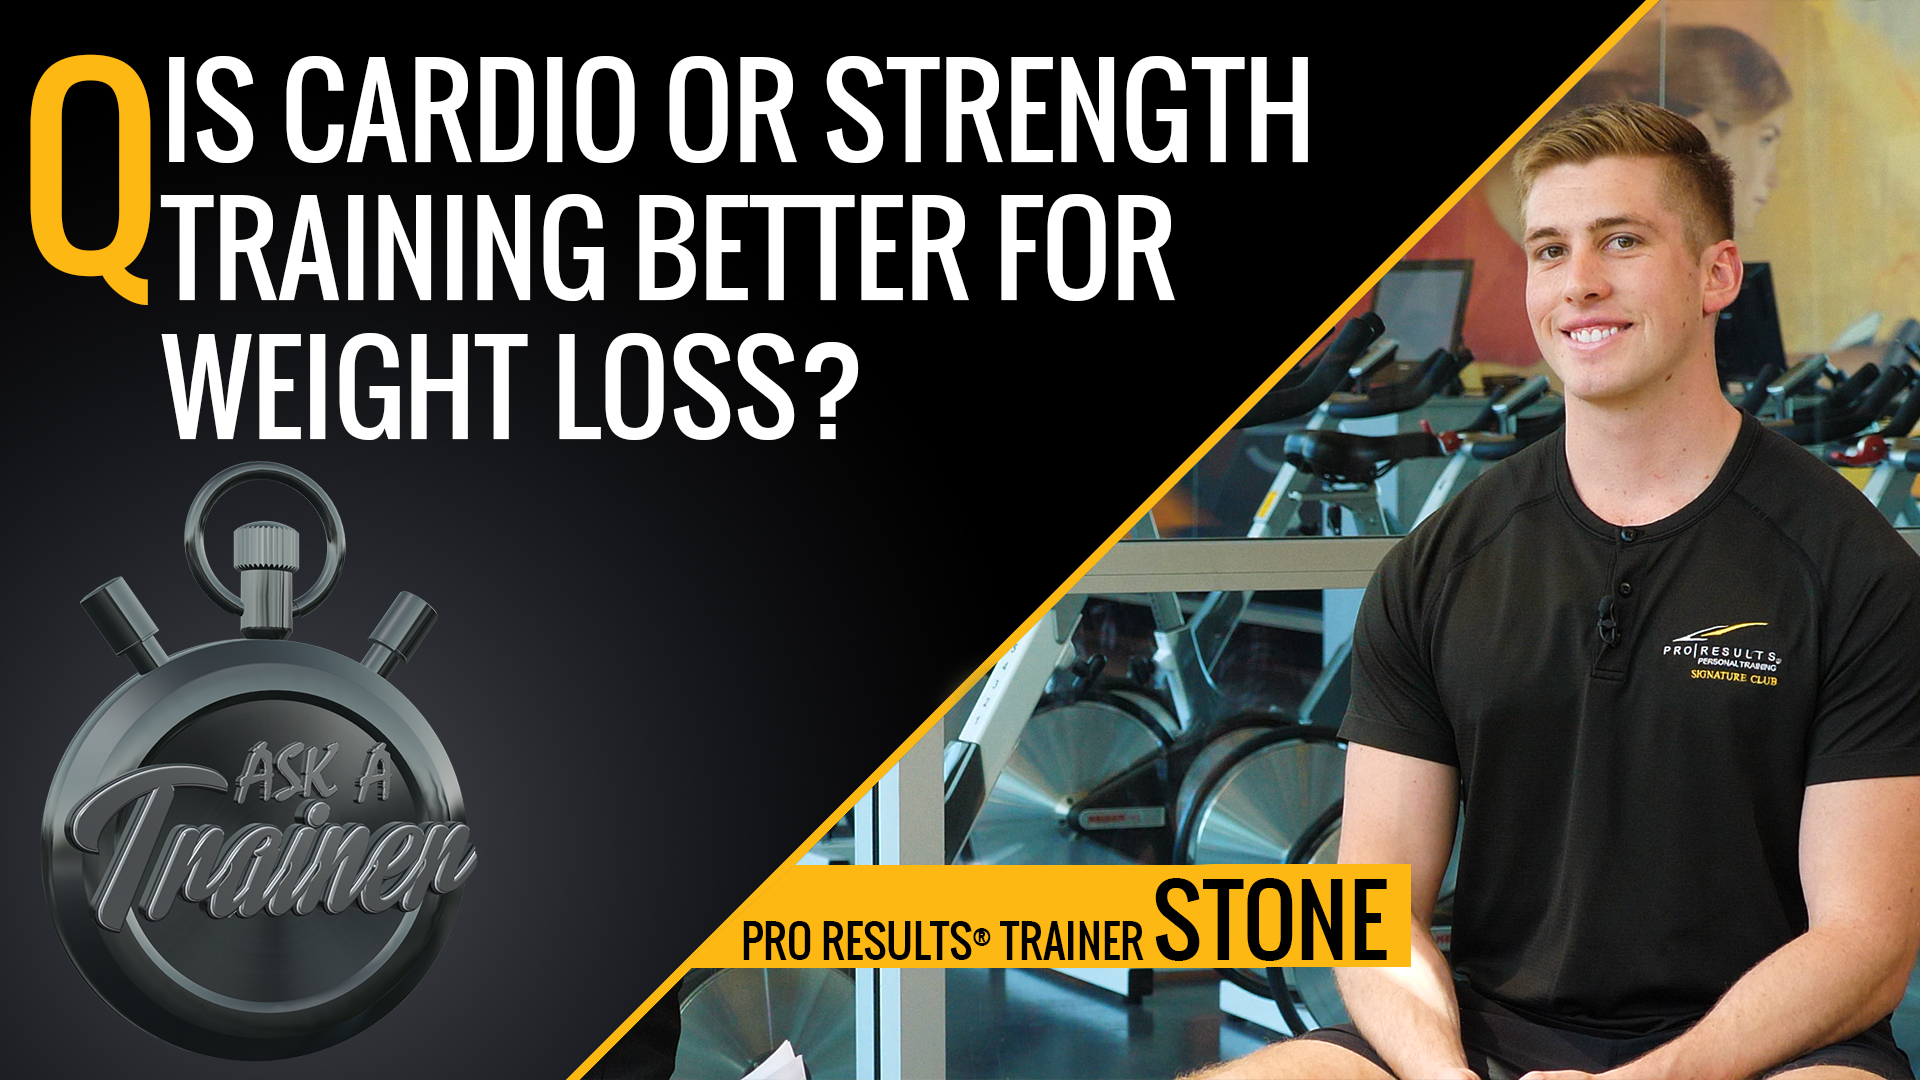 AAT: Ep. 22 – Is Cardio or Strength Training Better for Weight Loss?